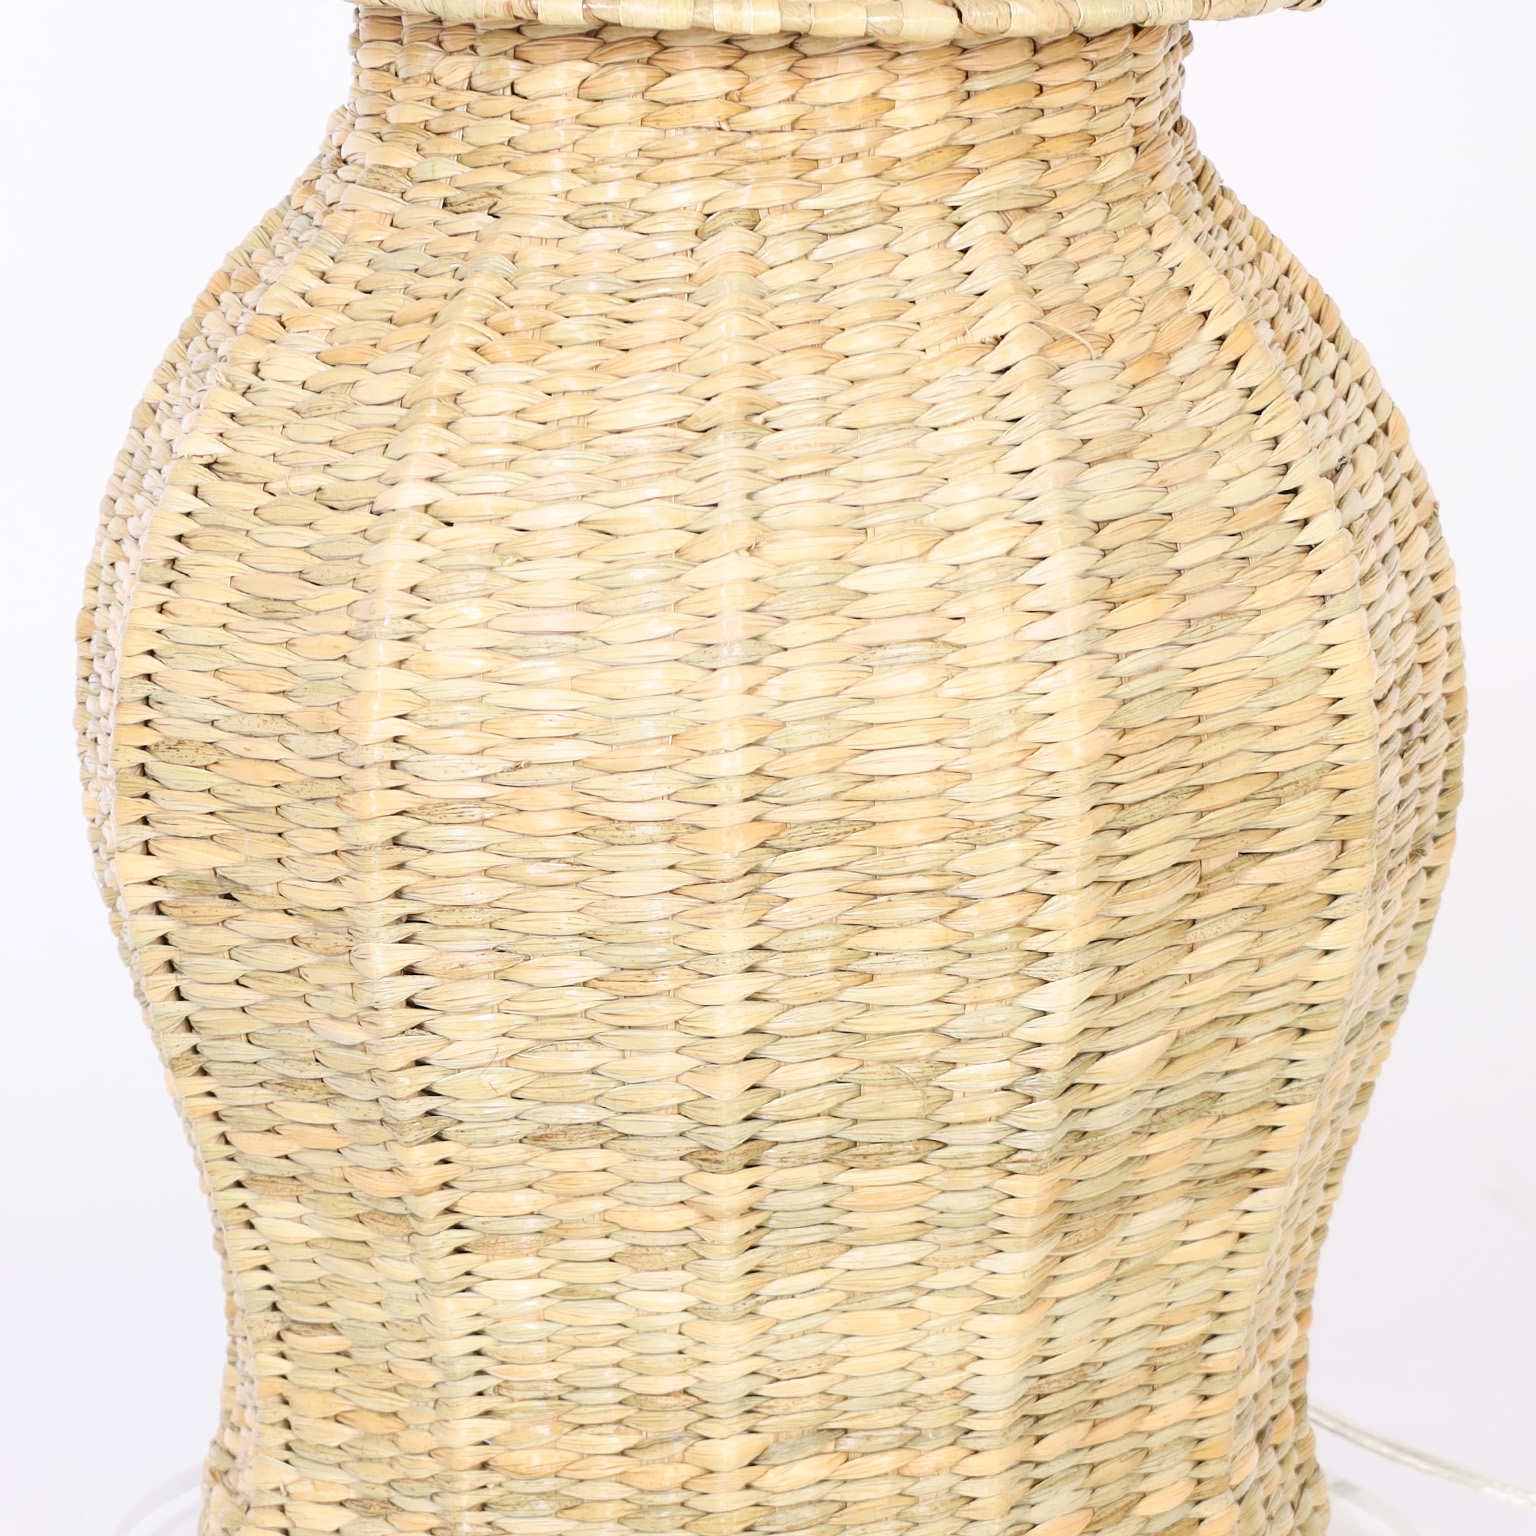 Pair of Wicker Ginger Jar Form Table Lamps from the FS Flores Collection